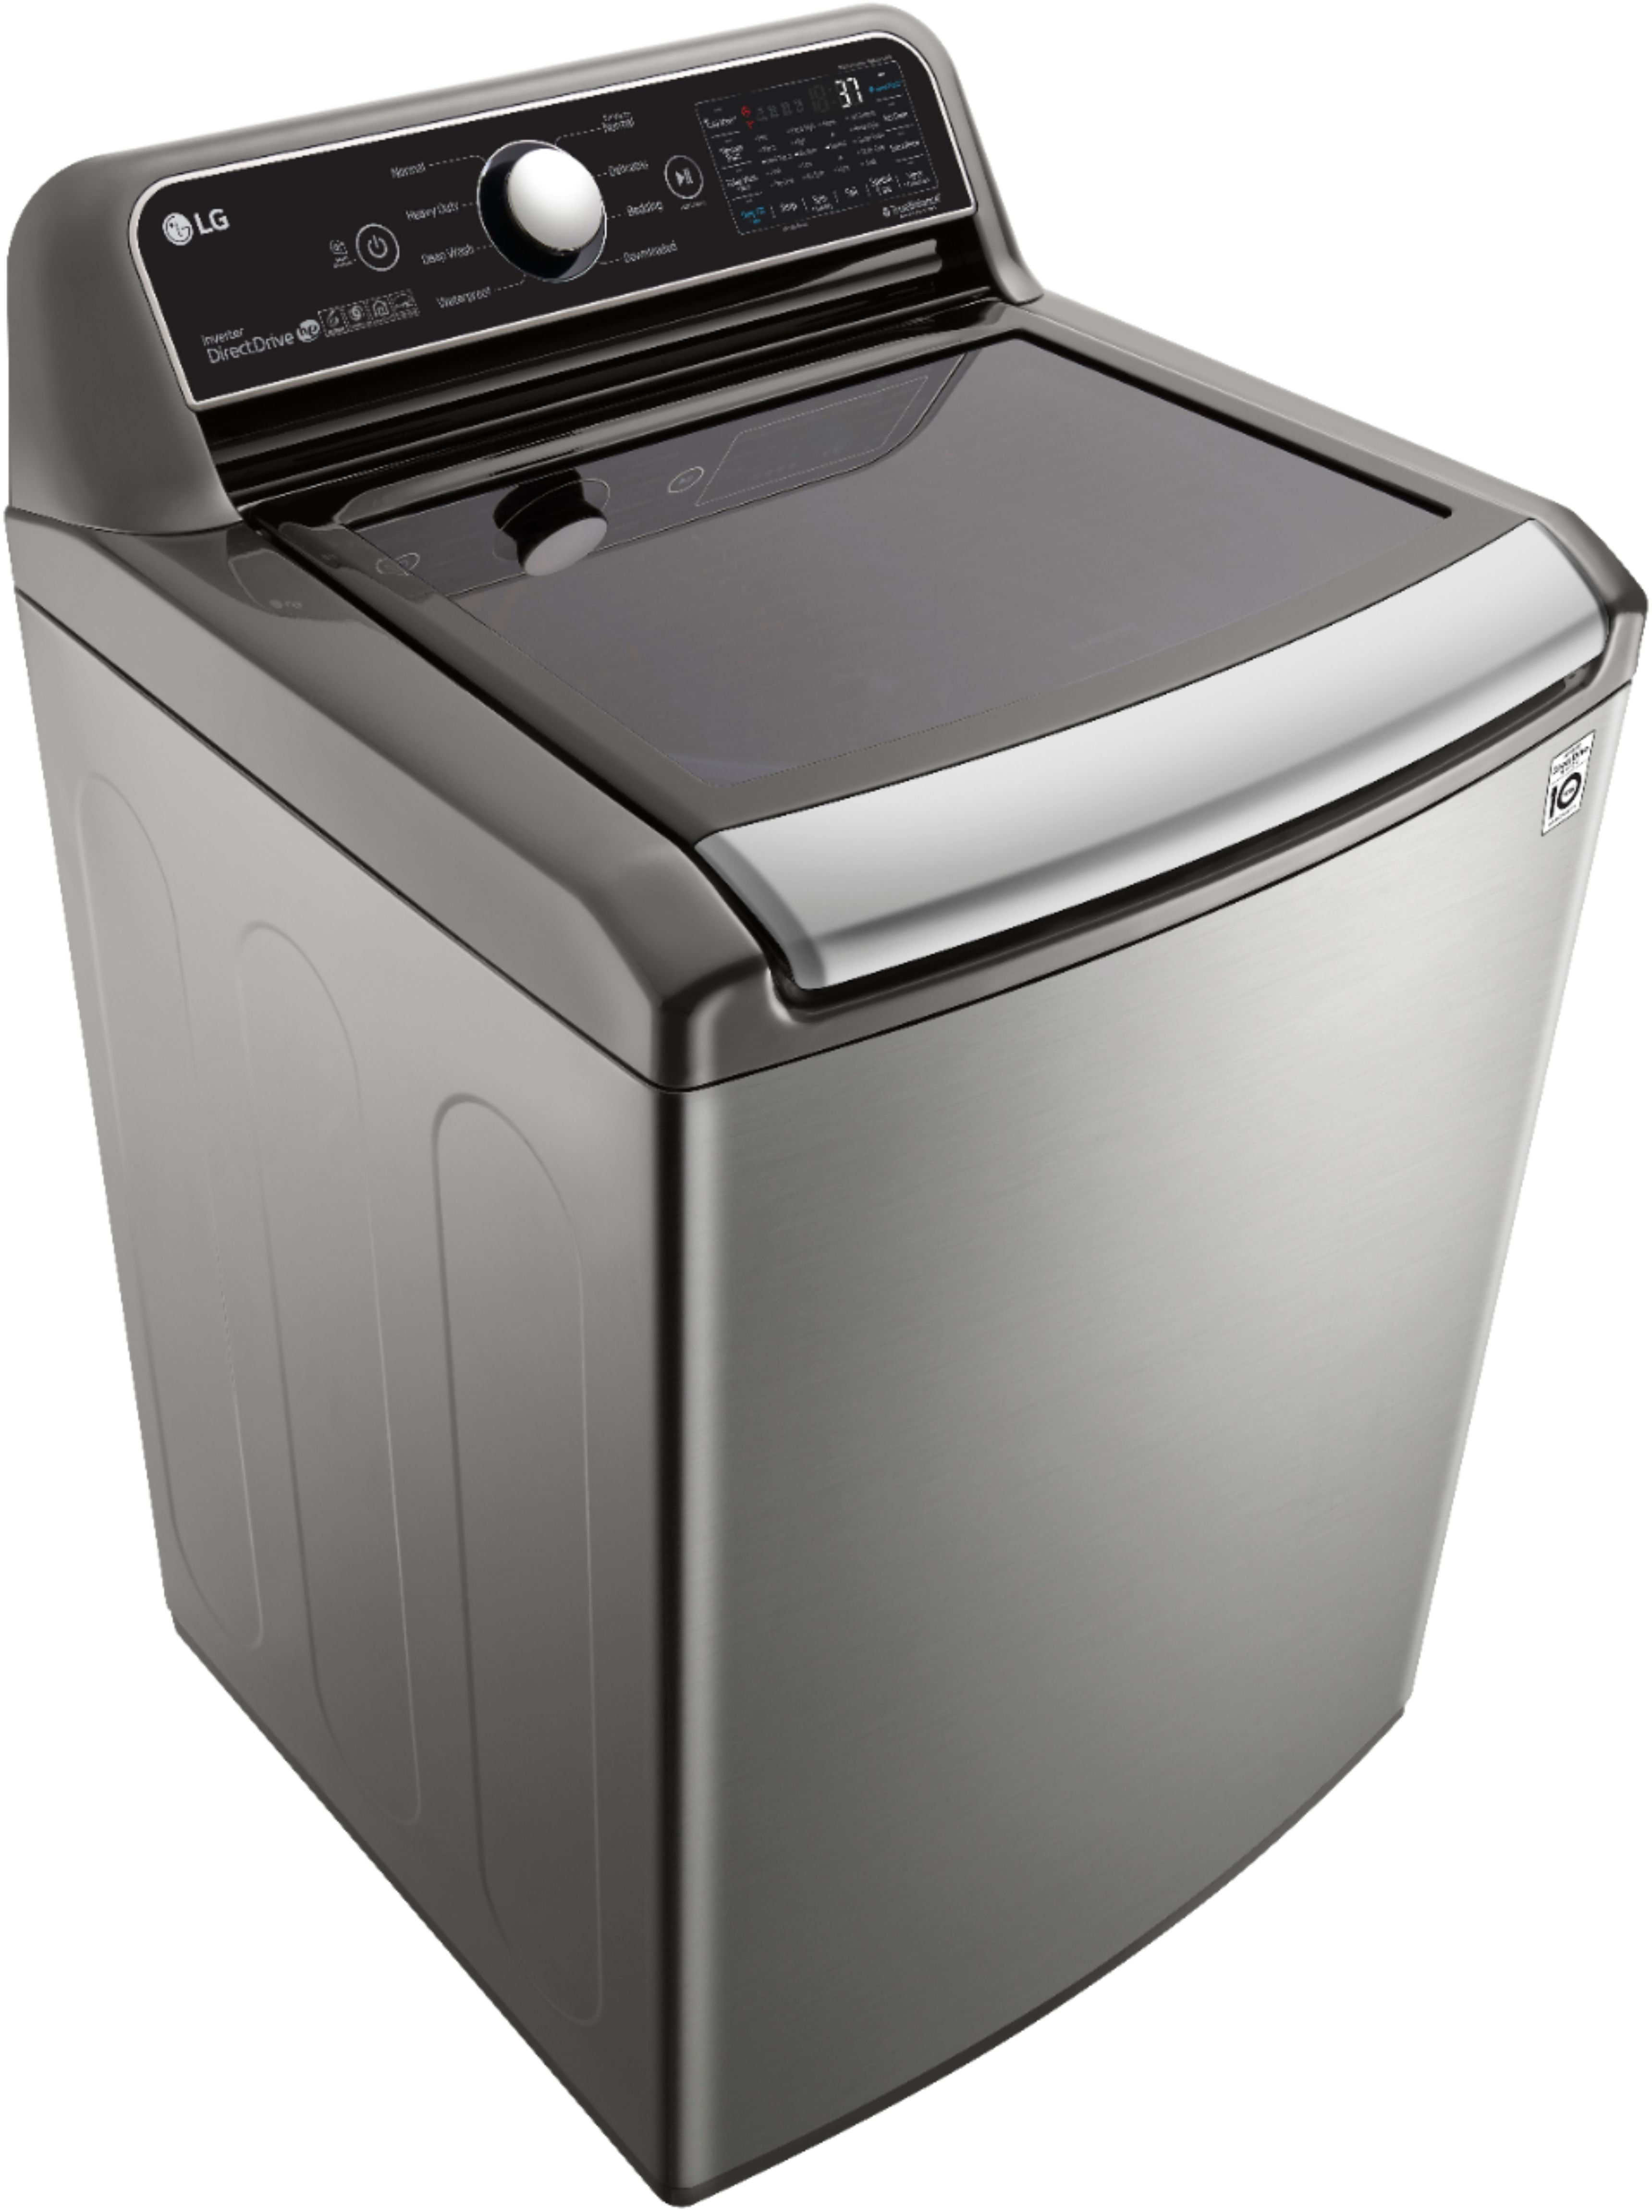 Angle View: LG - 4.8 Cu. Ft. High-Efficiency Top Load Washer with 4-Way Agitator and TurboWash 3D - Graphite steel